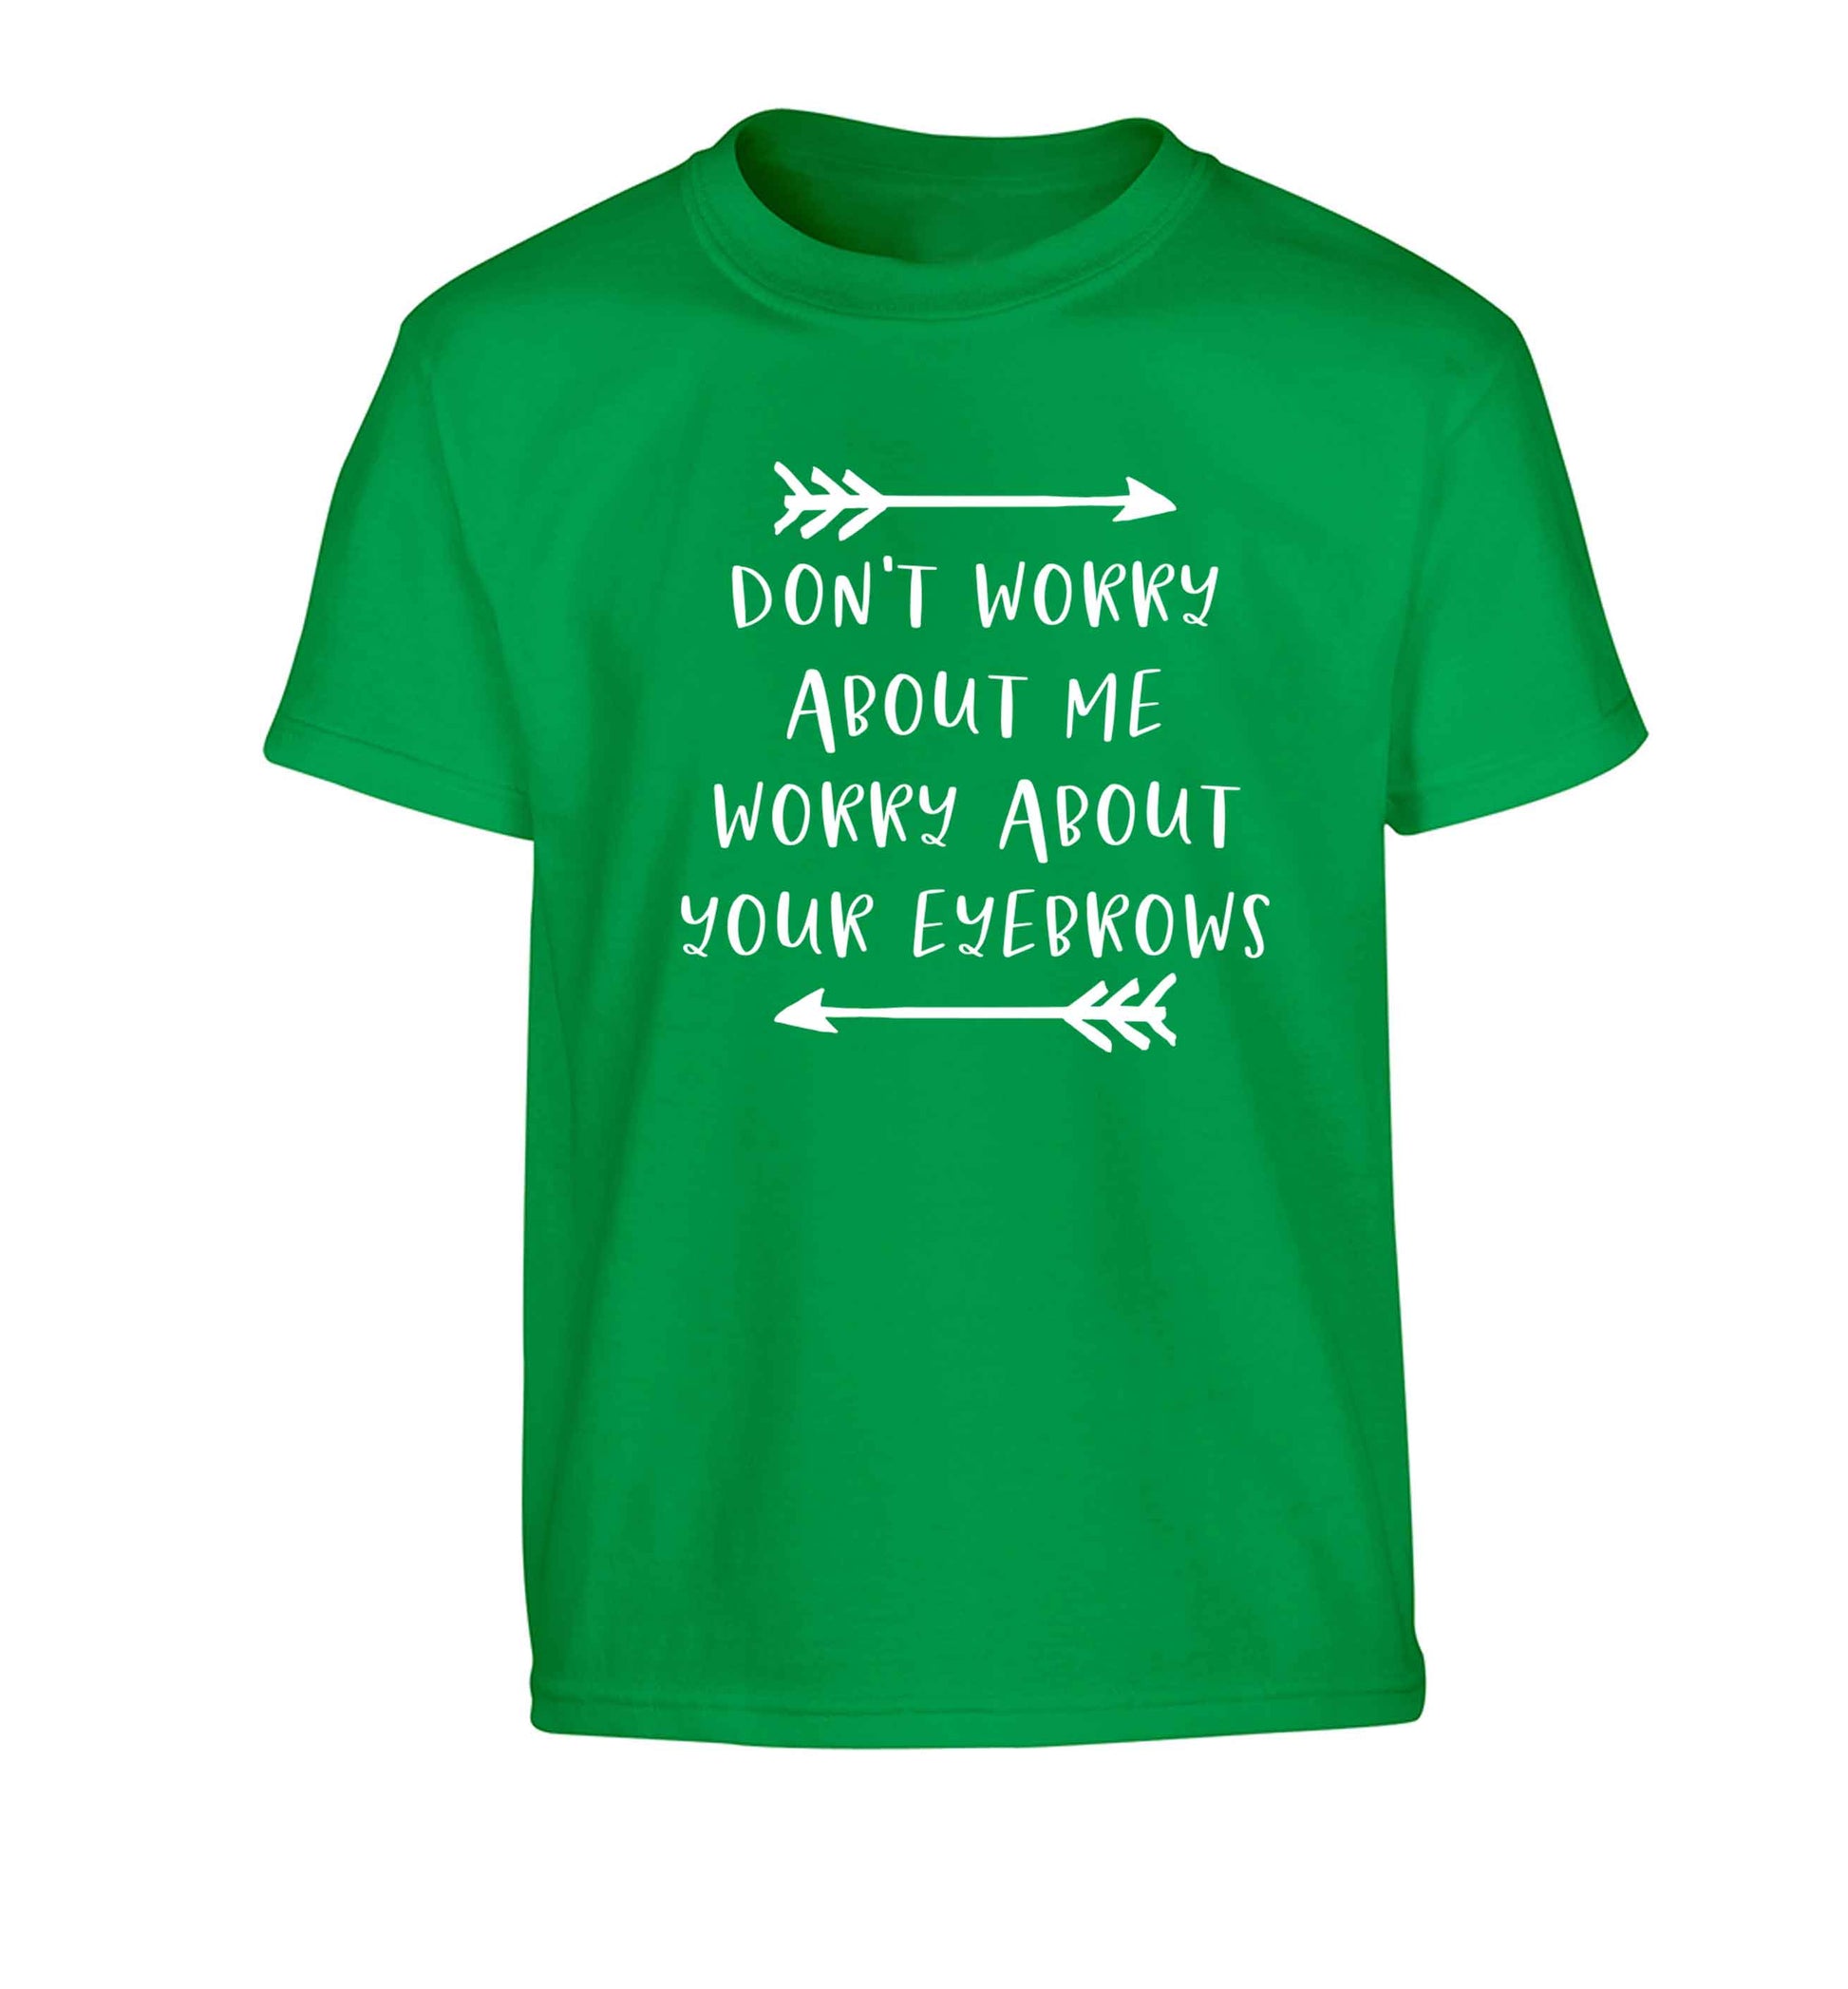 Don't worry about me worry about your eyebrows Children's green Tshirt 12-13 Years